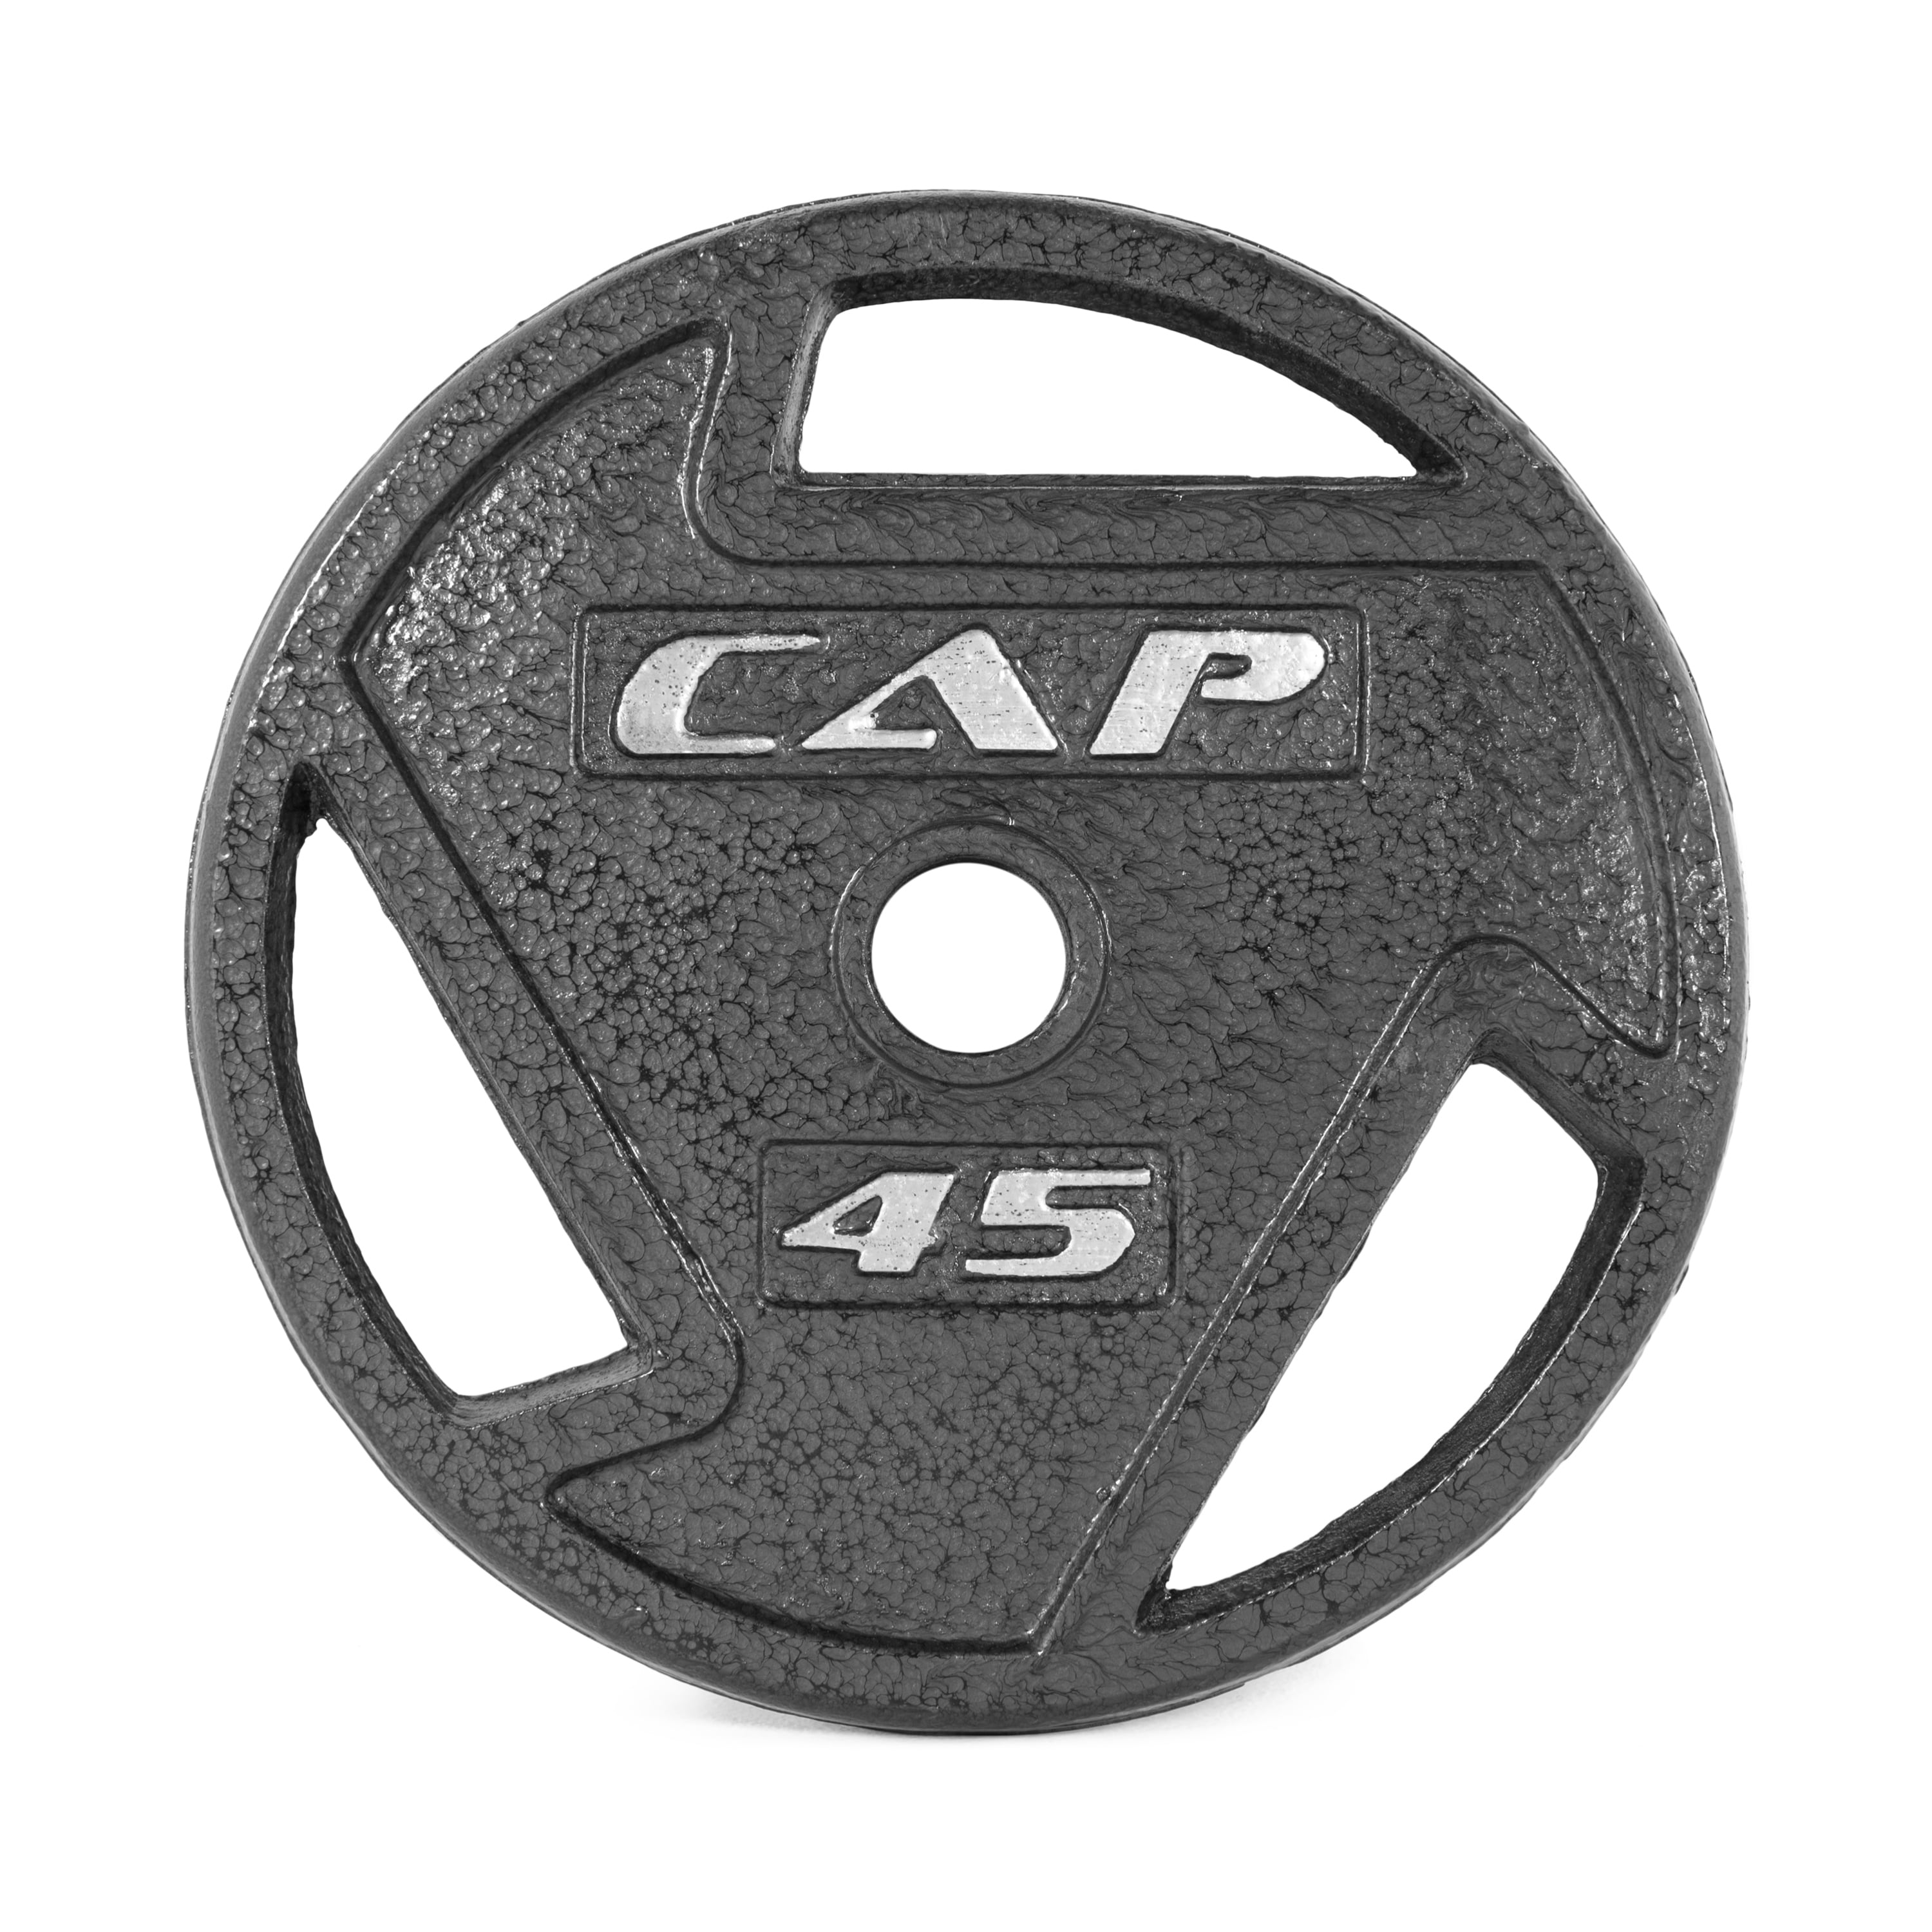 10 lb Weight Plates x 4 Cap for Standard 1” Inch BarbellSHIPS NOW 40 LBS 